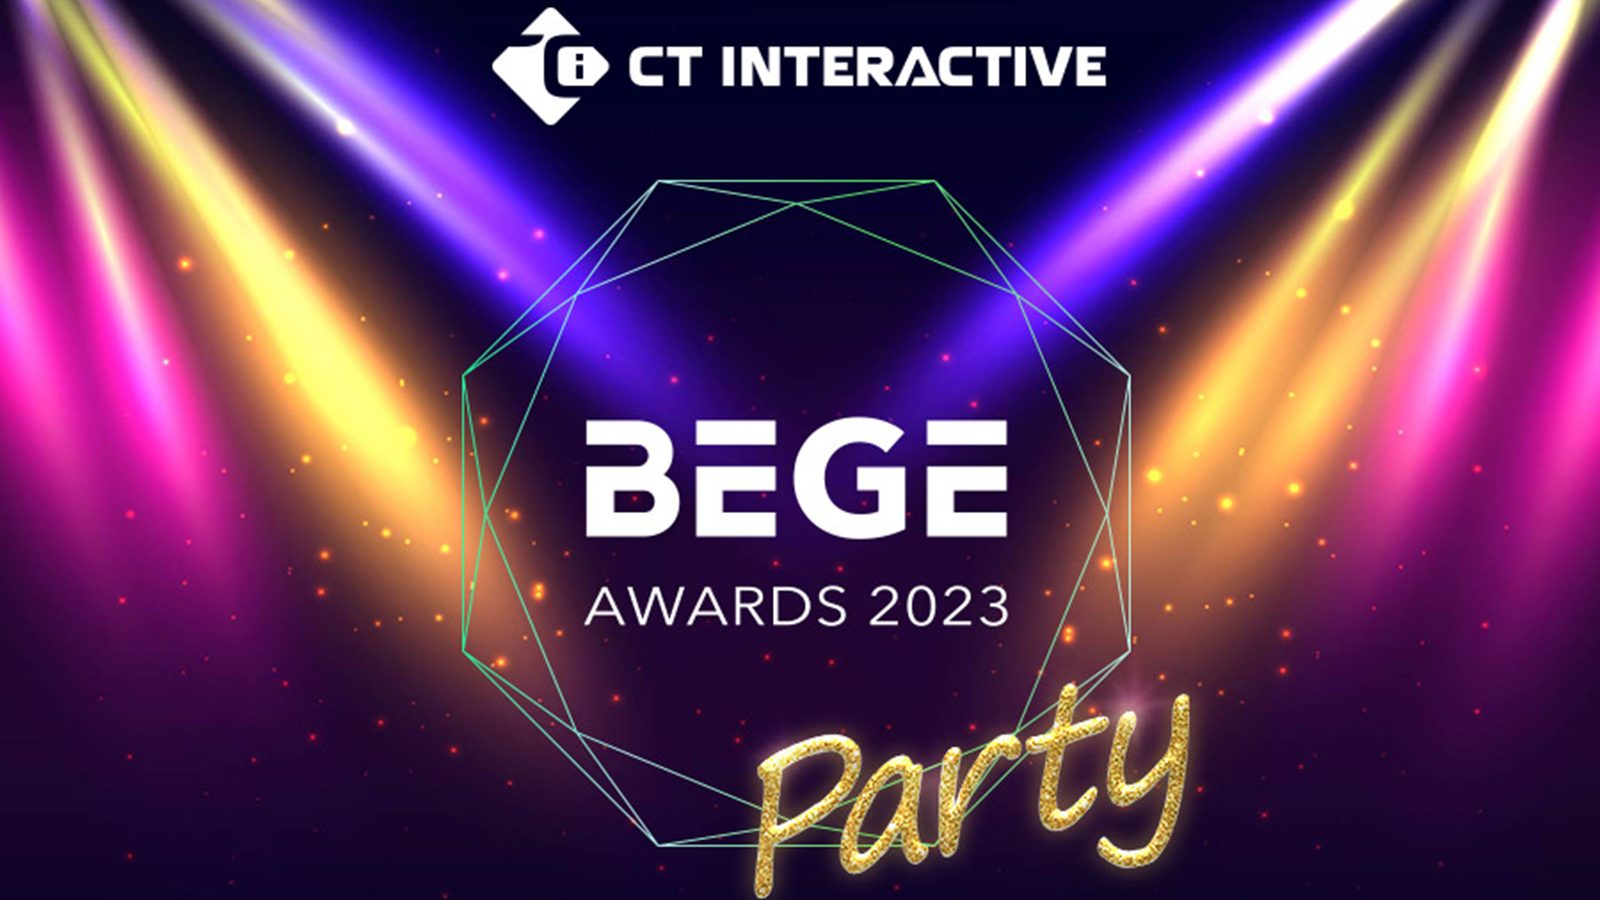 CT Interactive Sponsorship at BEGE Awards Party